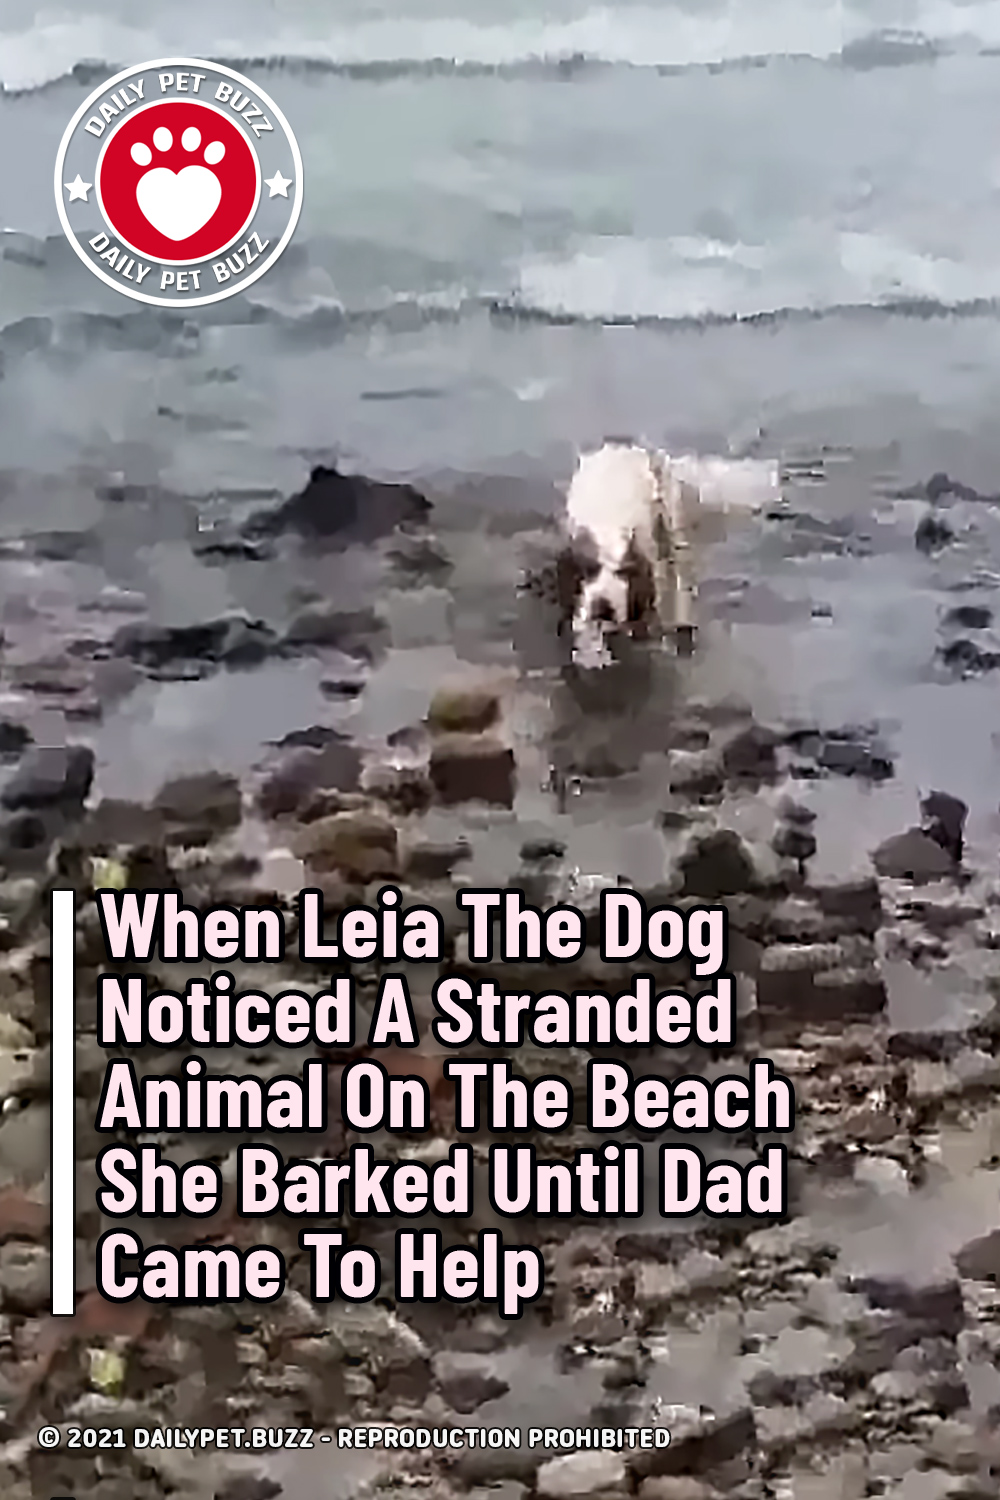 When Leia The Dog Noticed A Stranded Animal On The Beach She Barked Until Dad Came To Help